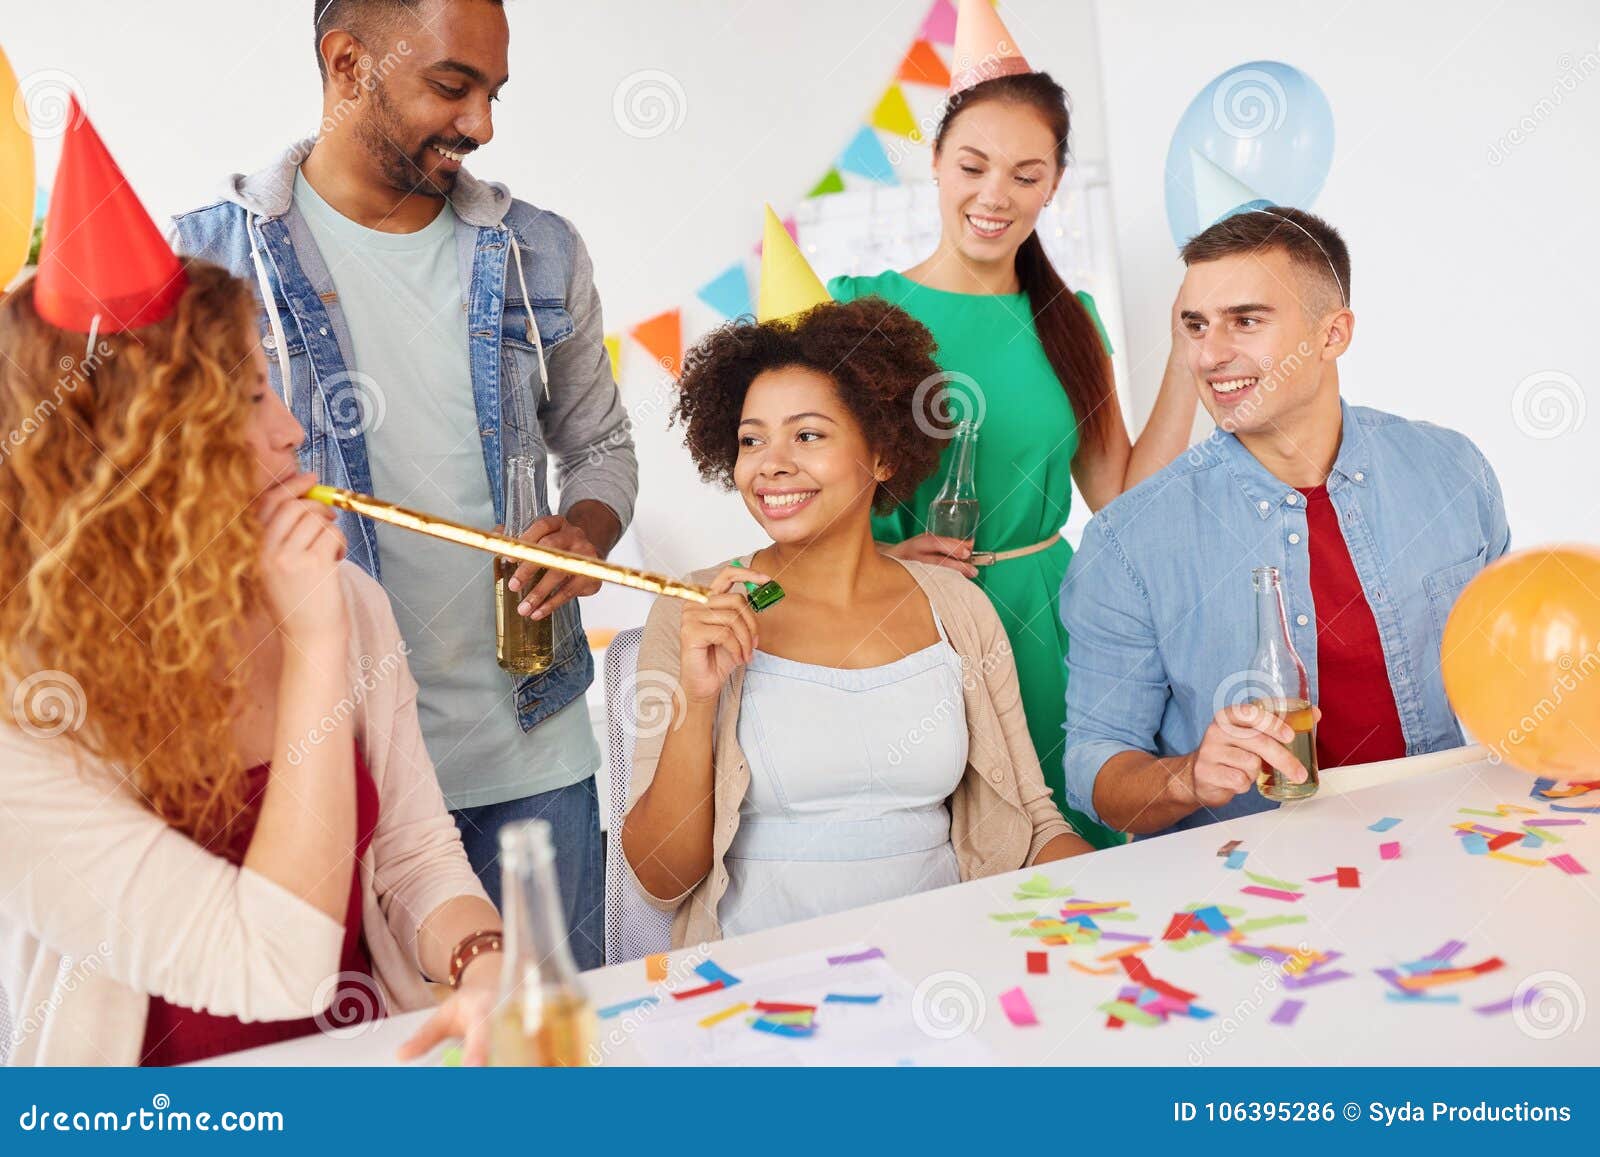 Happy Team Having Fun At Office Party Stock Photo - Image of ... Office Team Celebration